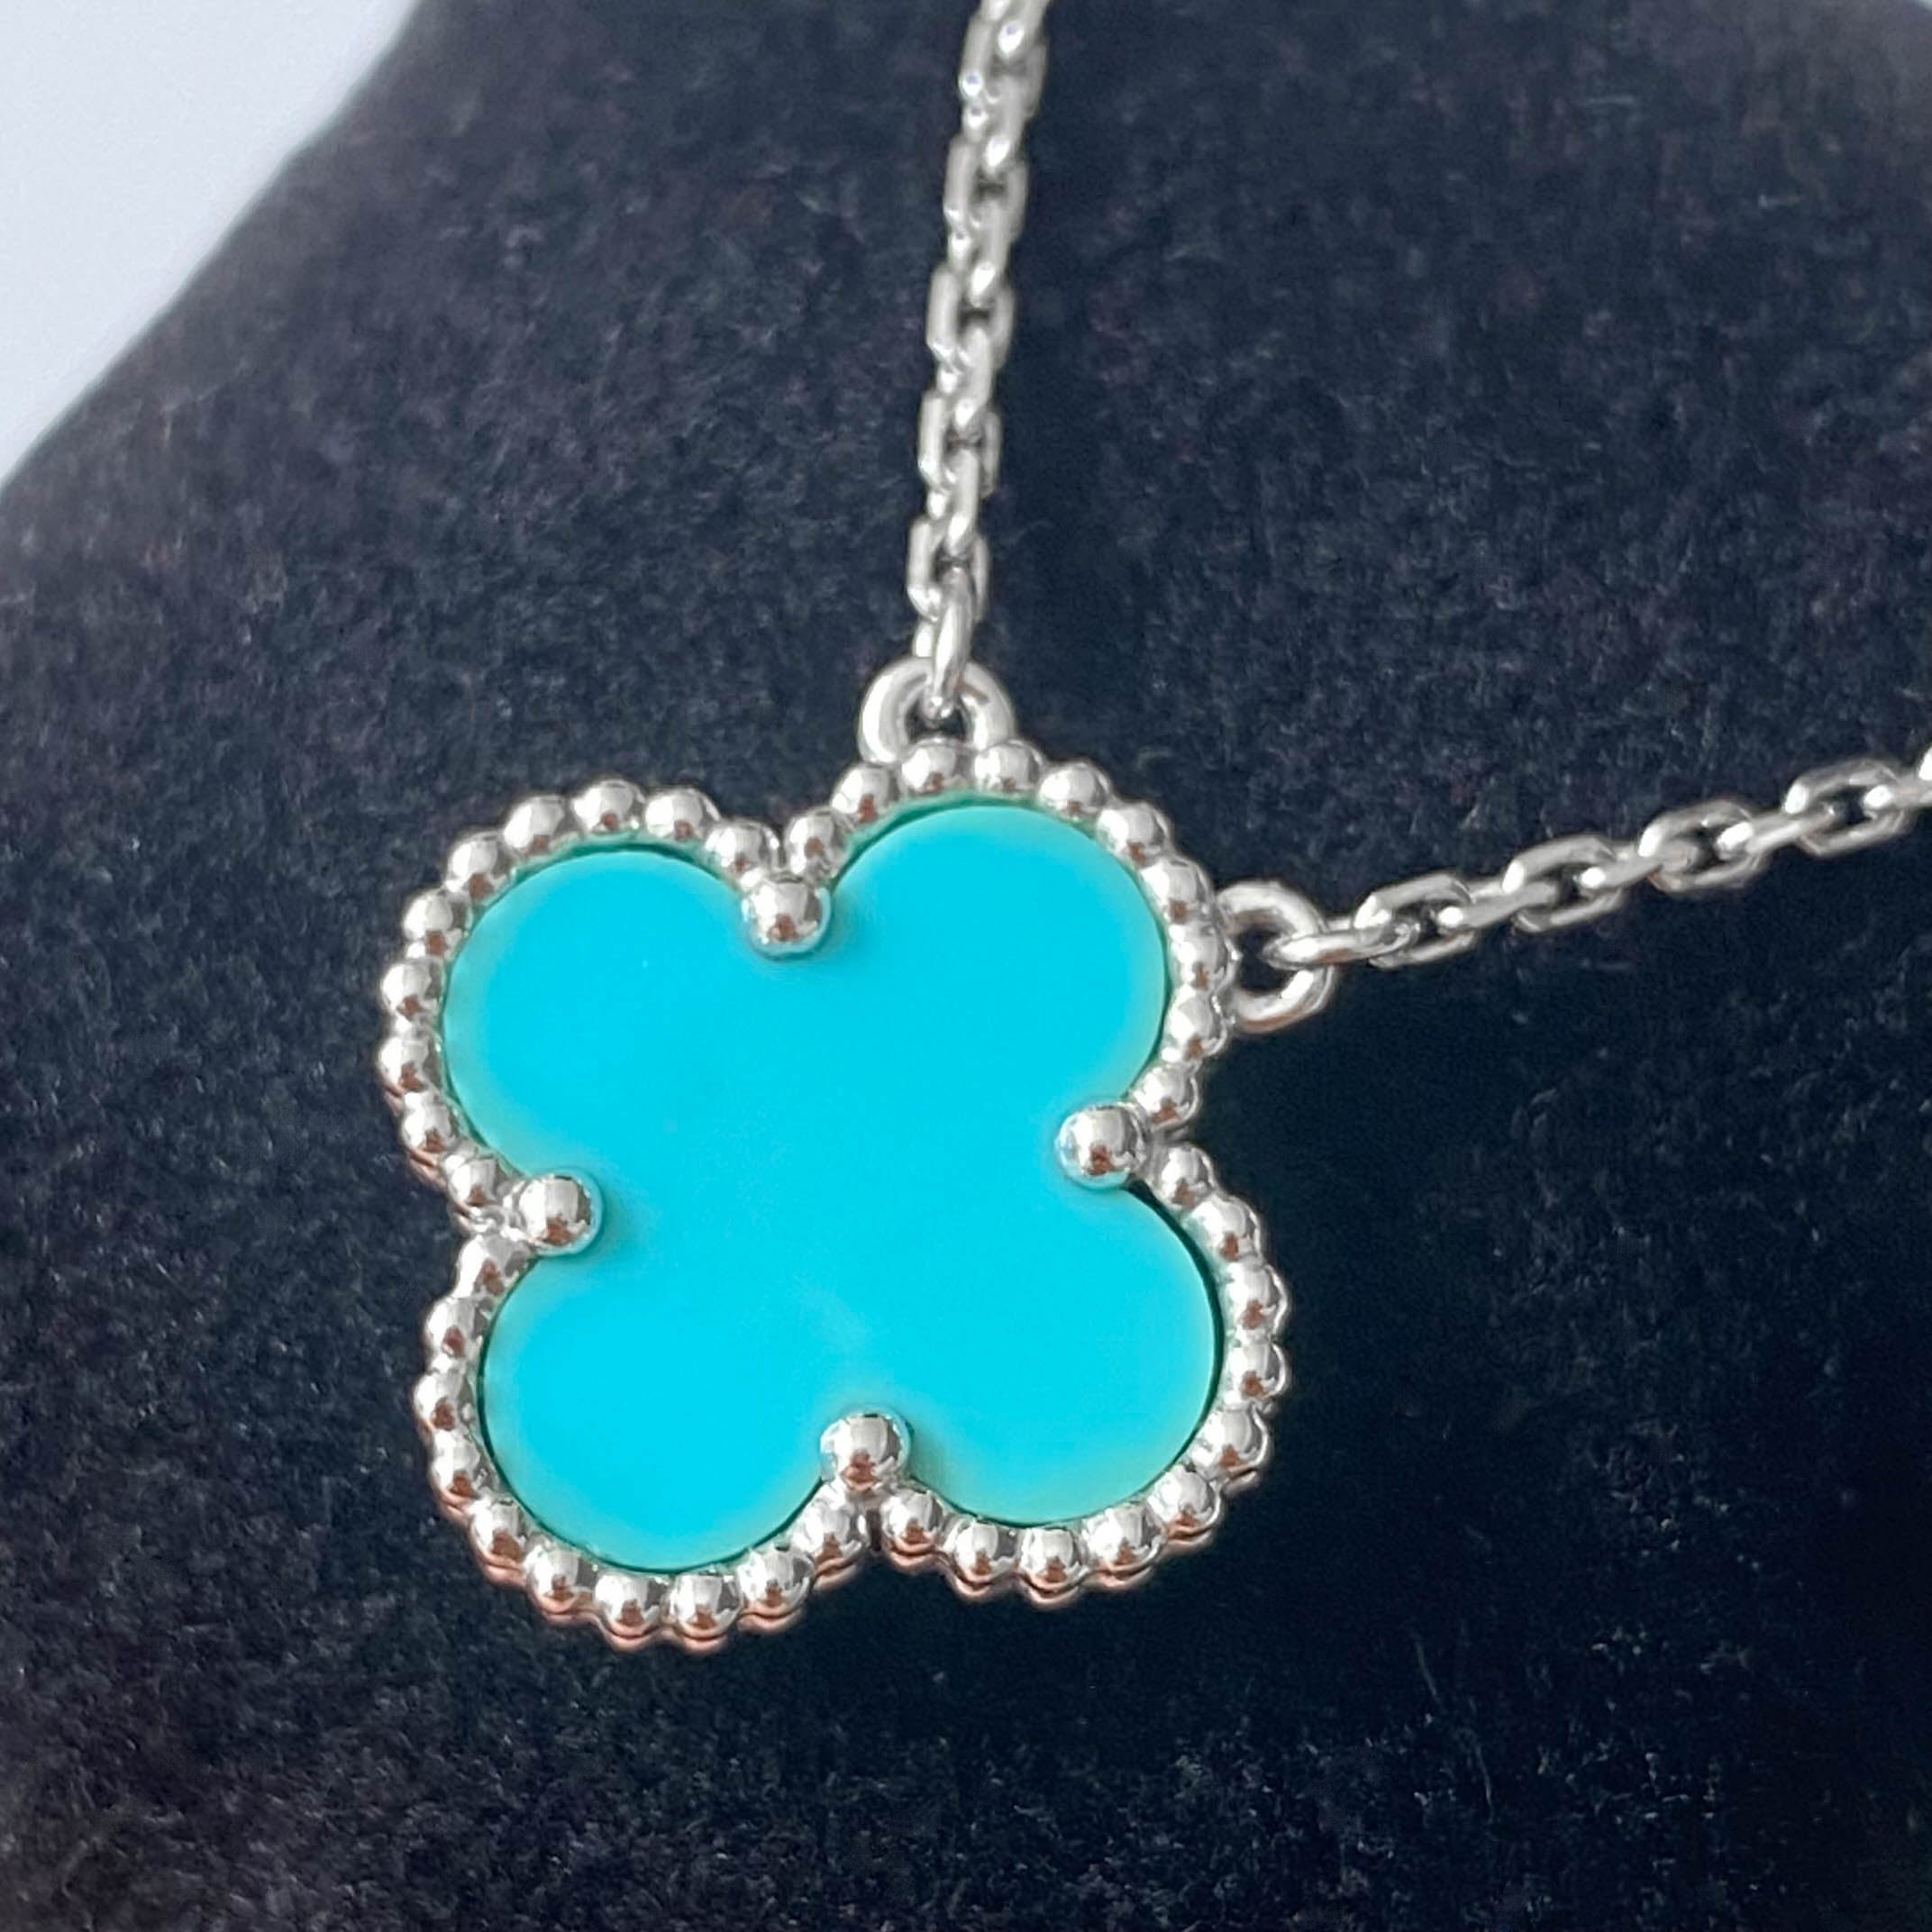 Vintage Alhambra Pendant Necklace in 18k White Gold Turquoise